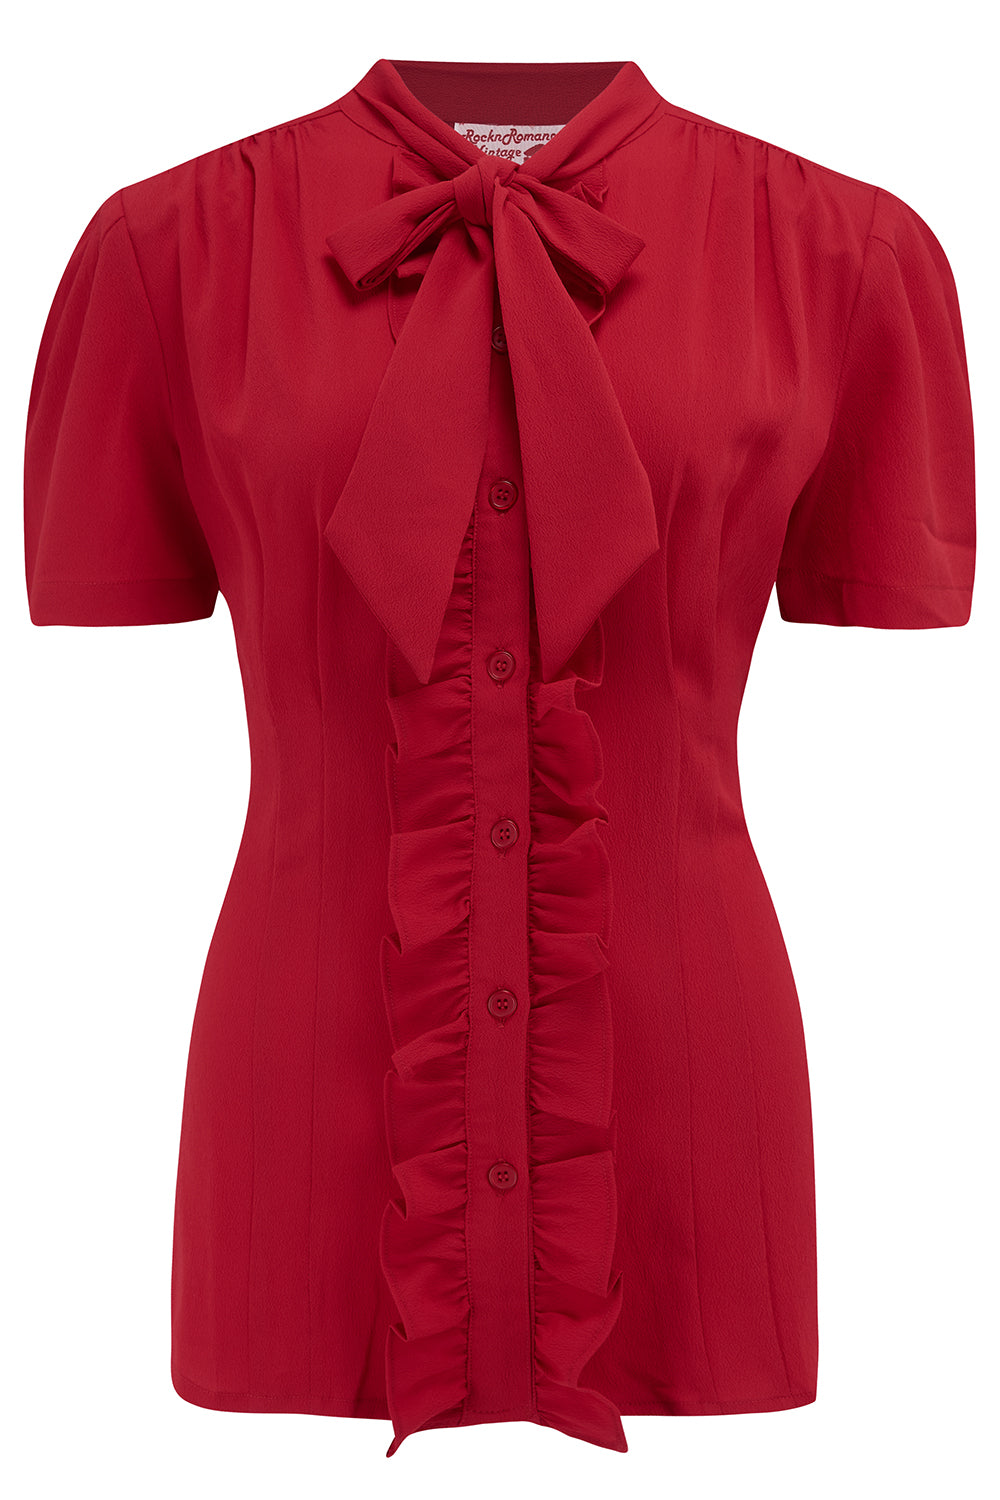 The "Betsy" Ruffle, Pussybow Blouse in Solid Red, True & Authentic 1950s Vintage Style - CC41, Goodwood Revival, Twinwood Festival, Viva Las Vegas Rockabilly Weekend Rock n Romance Rock n Romance